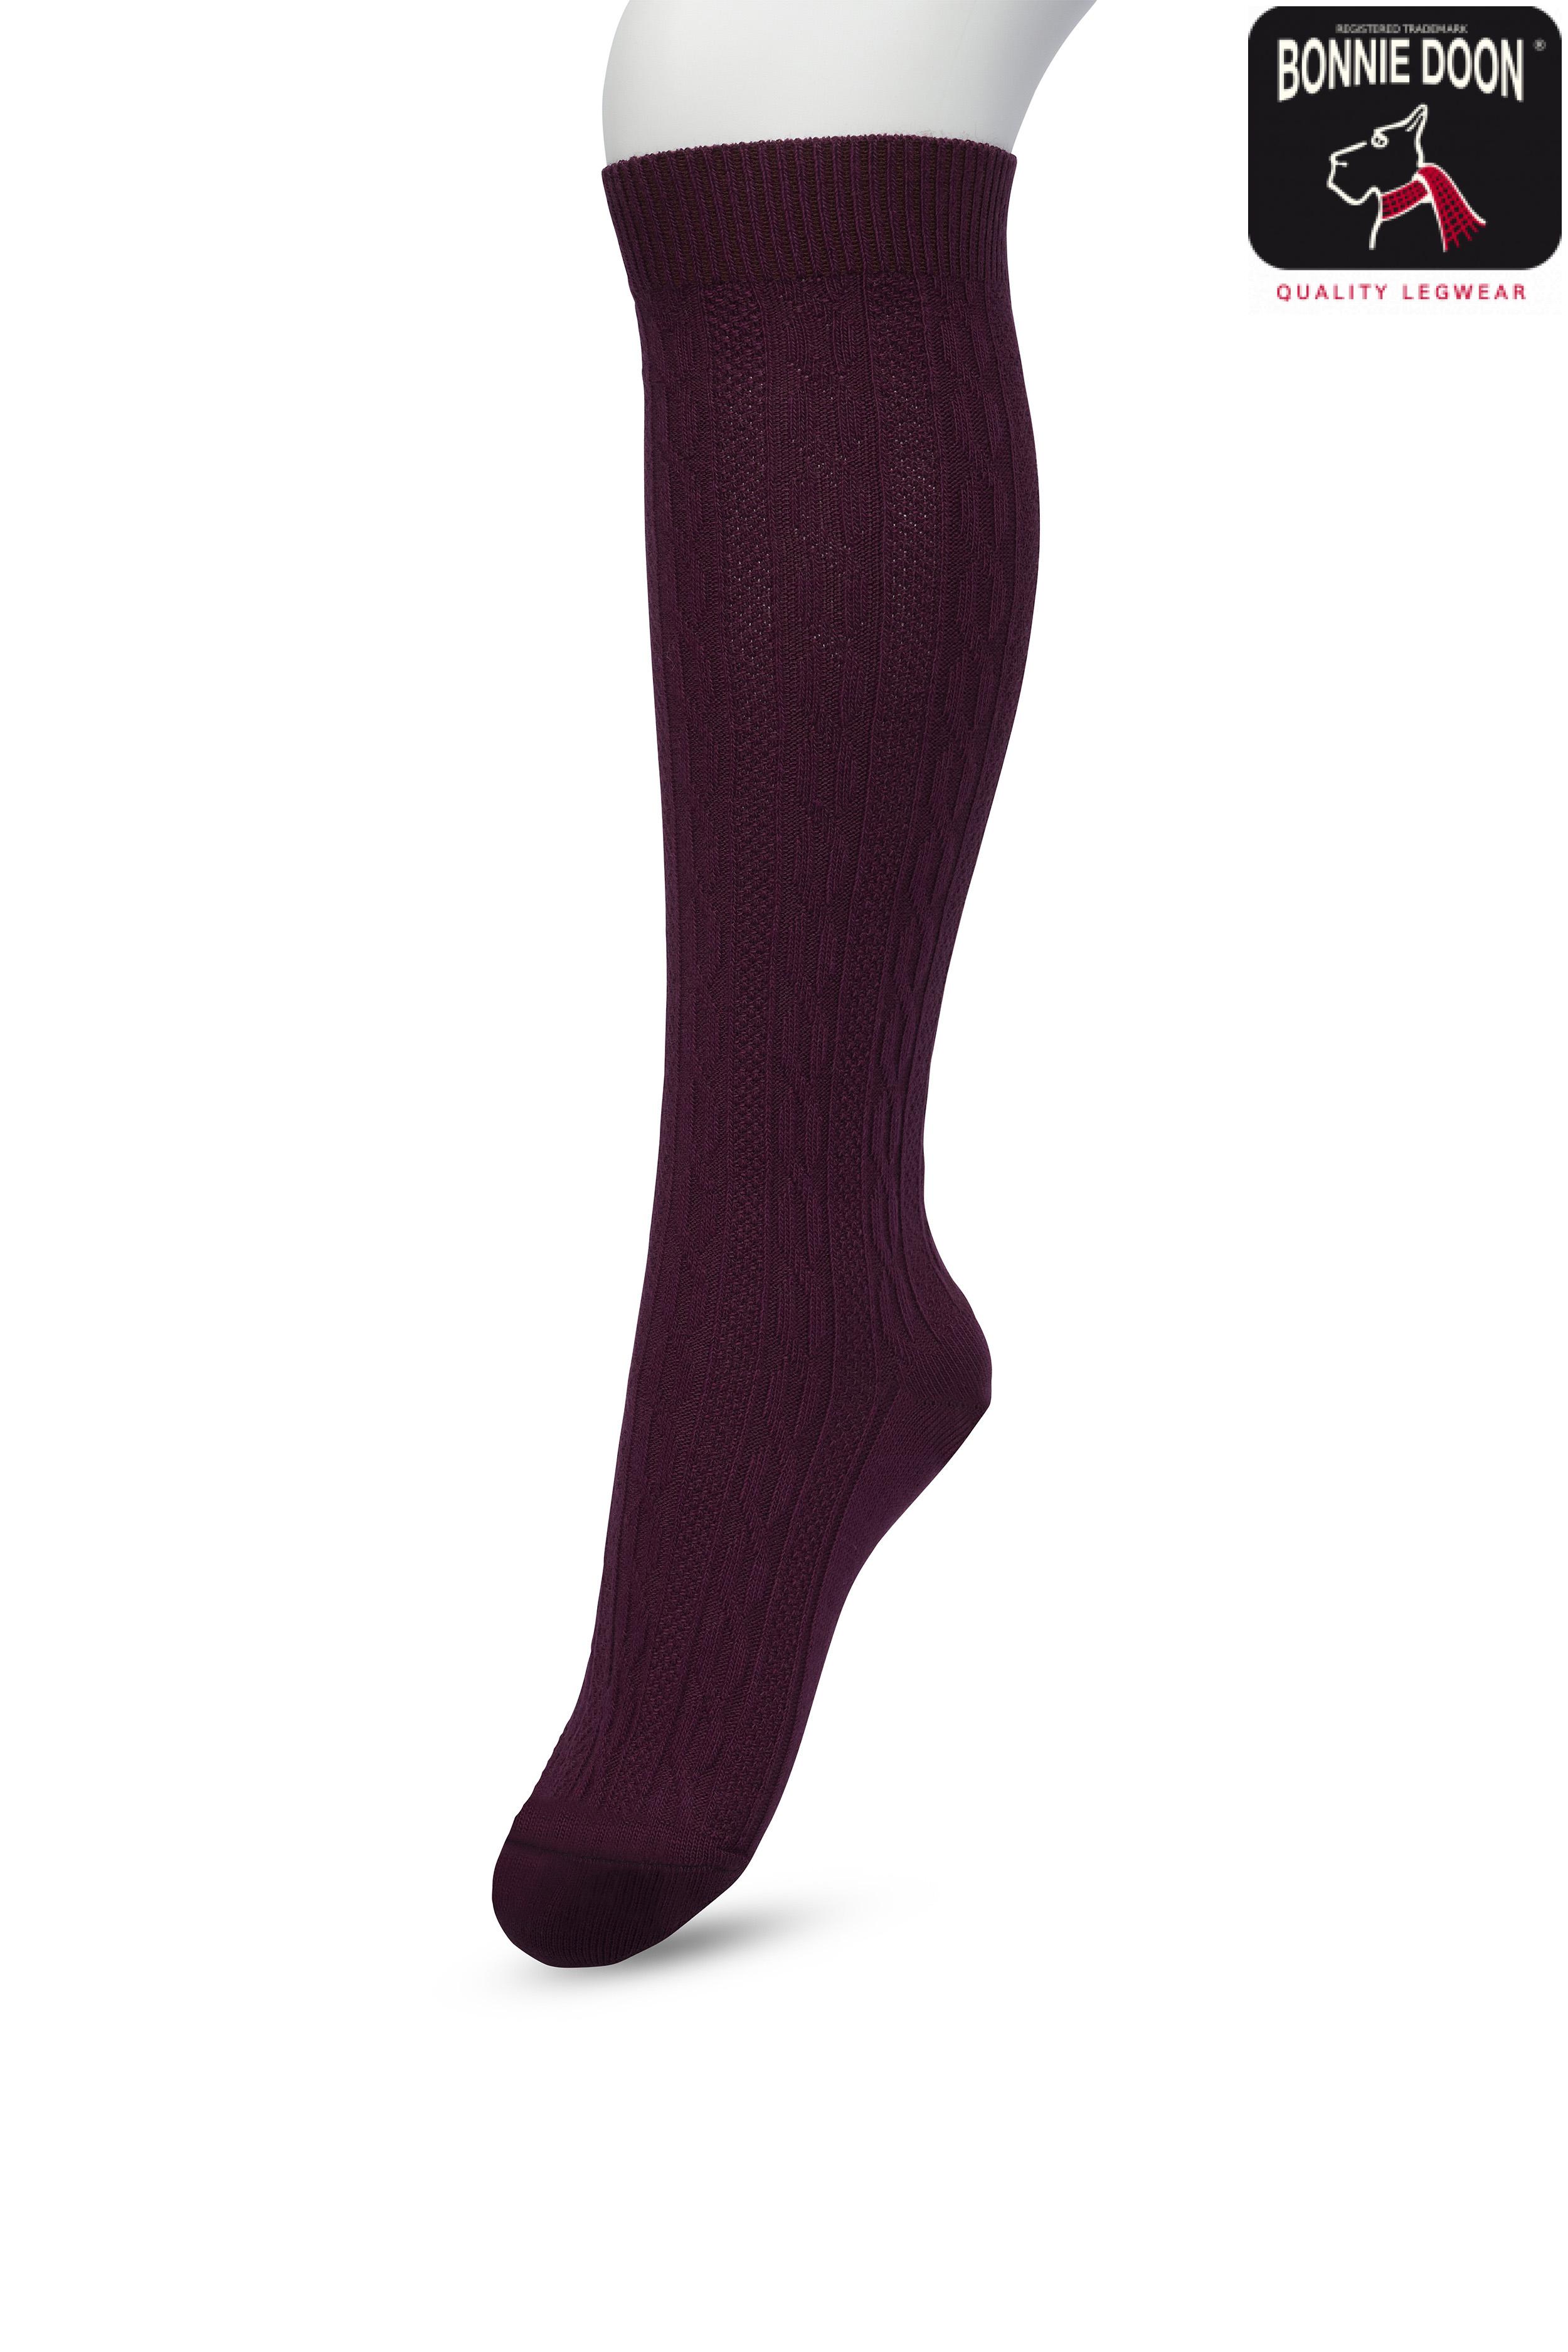 Classic Cable knee high Crushed violets